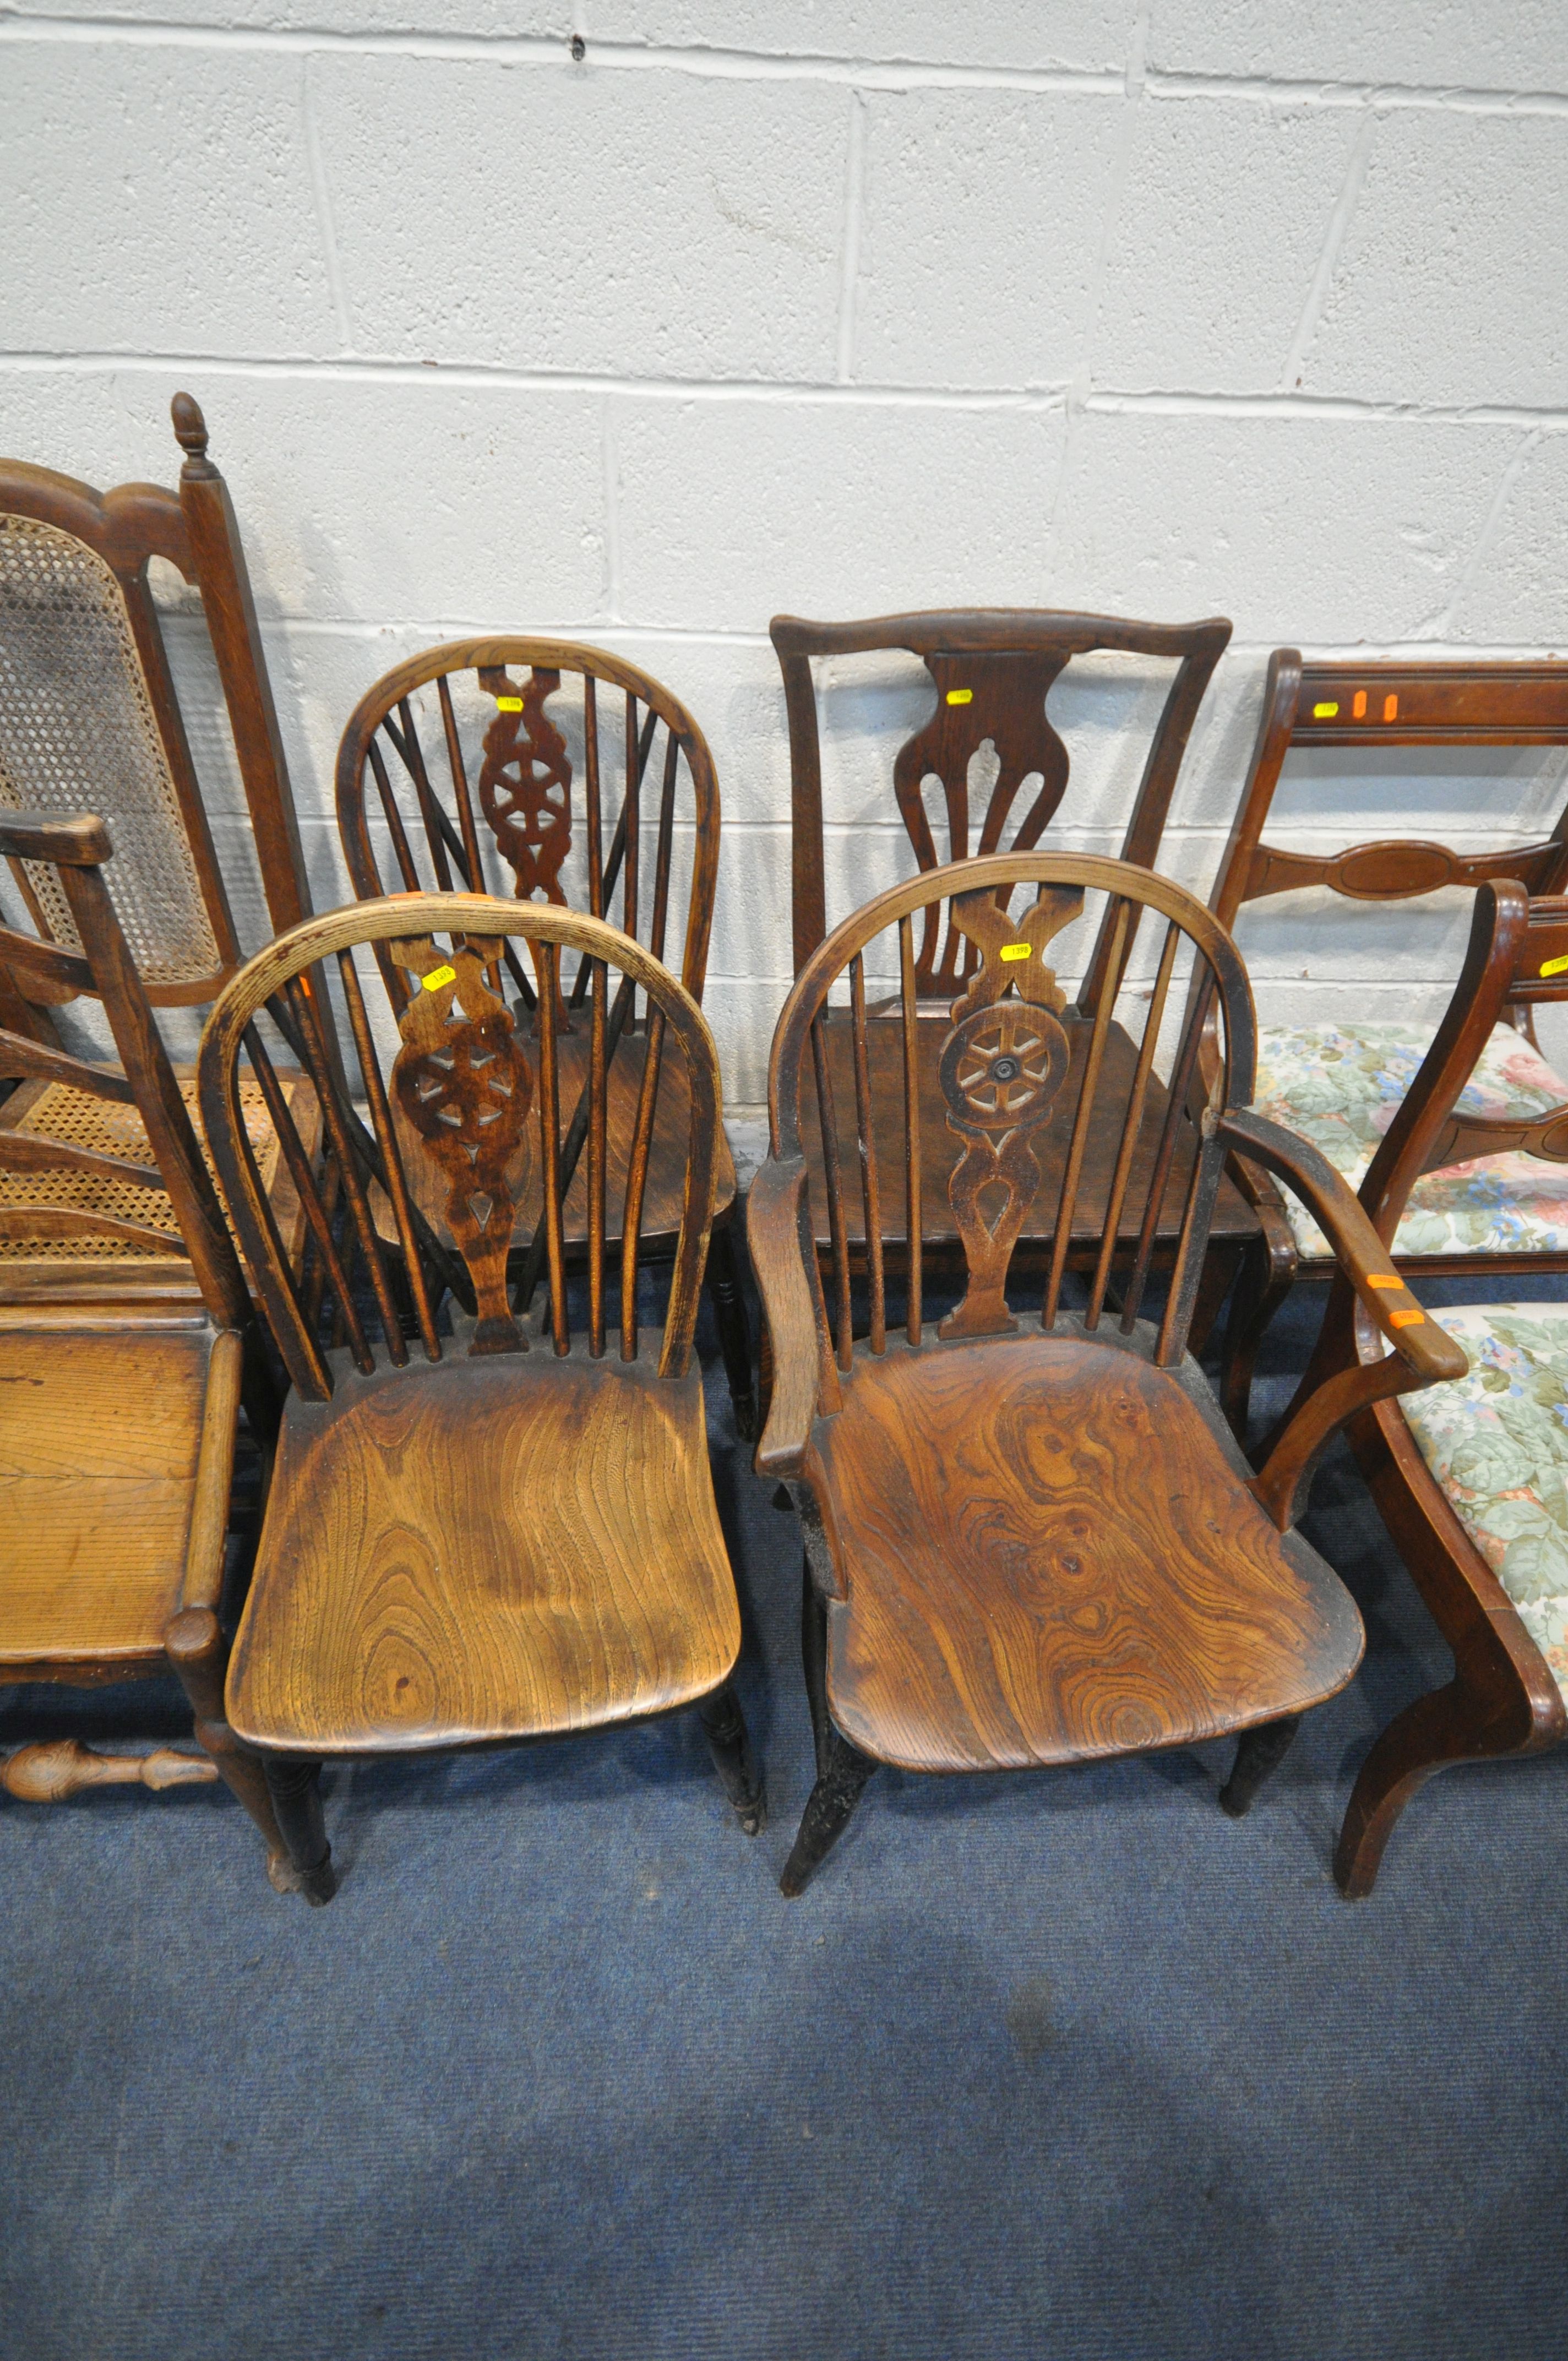 A SELECTION OF VARIOUS CHAIRS, of various ages and styles to include a carved oak high back chair, - Image 4 of 6